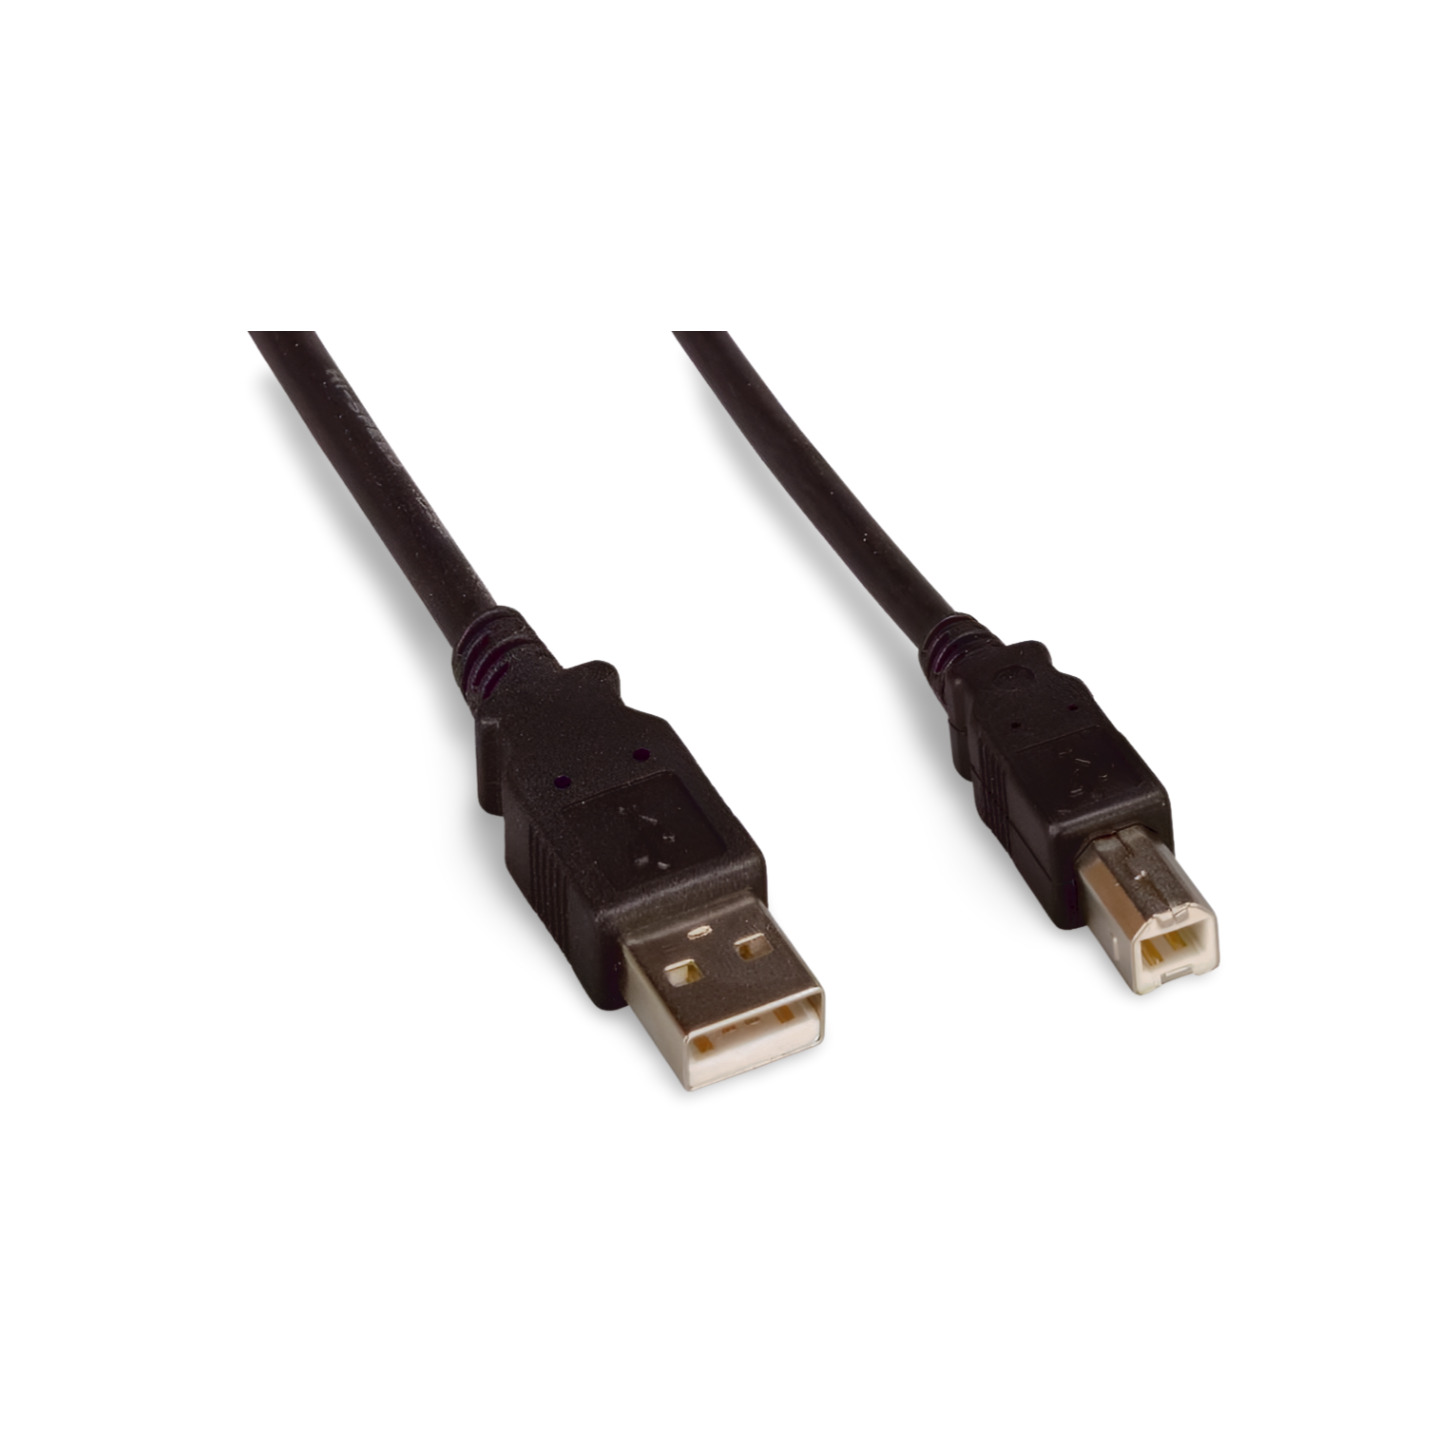 1ft USB 2.0 Computer Cable Type A Male to Type B Male - Black